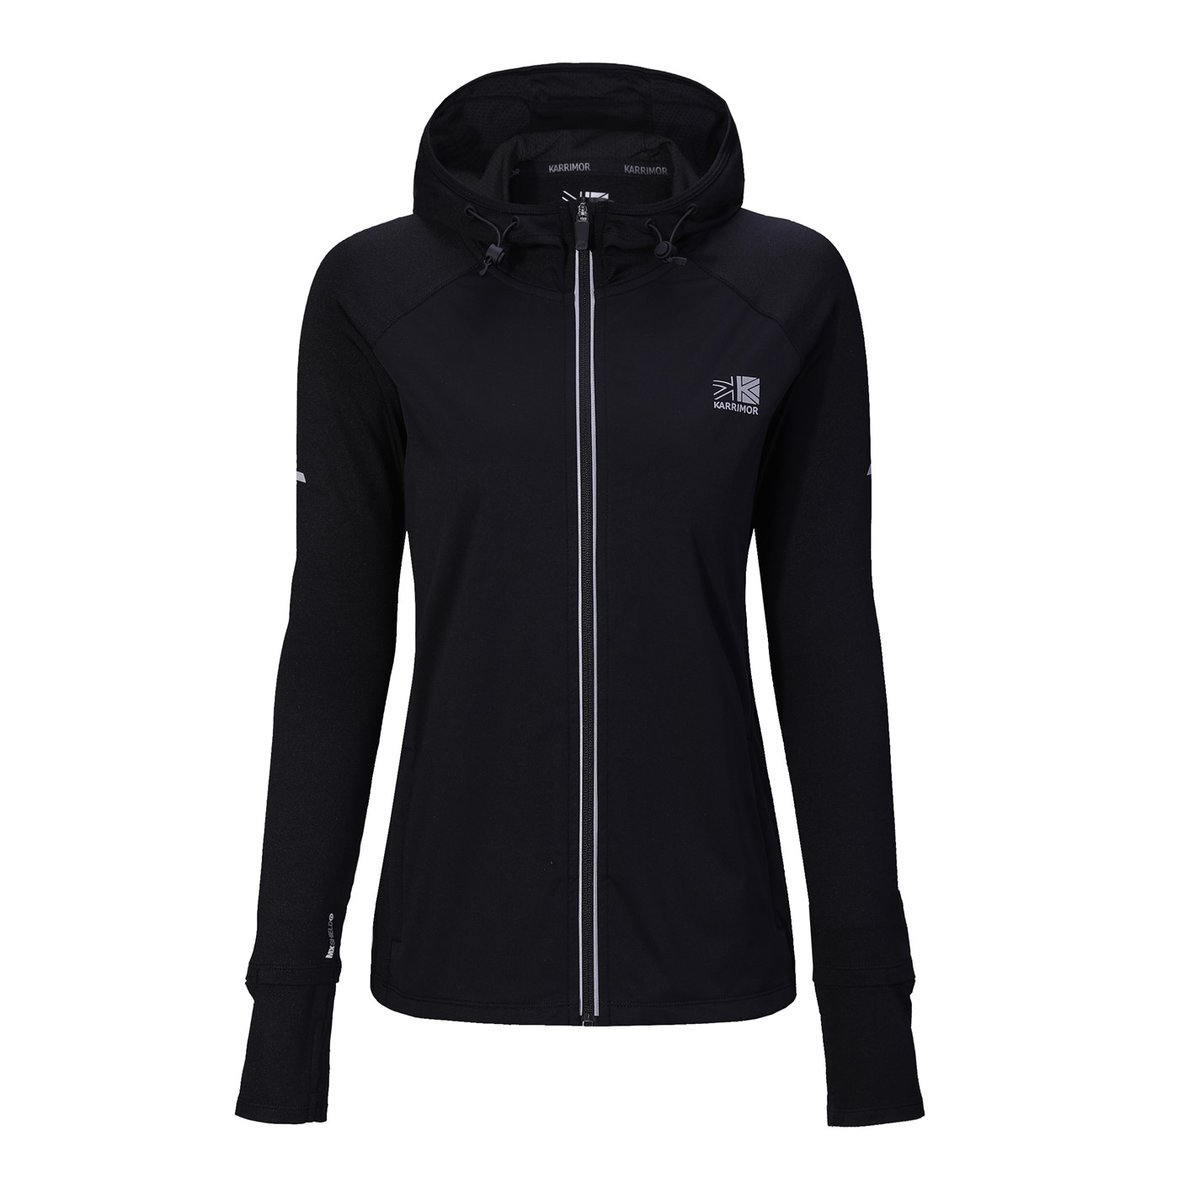 NIKE Men's Transitional Running Jacket With Removable Sleeves | Emporium